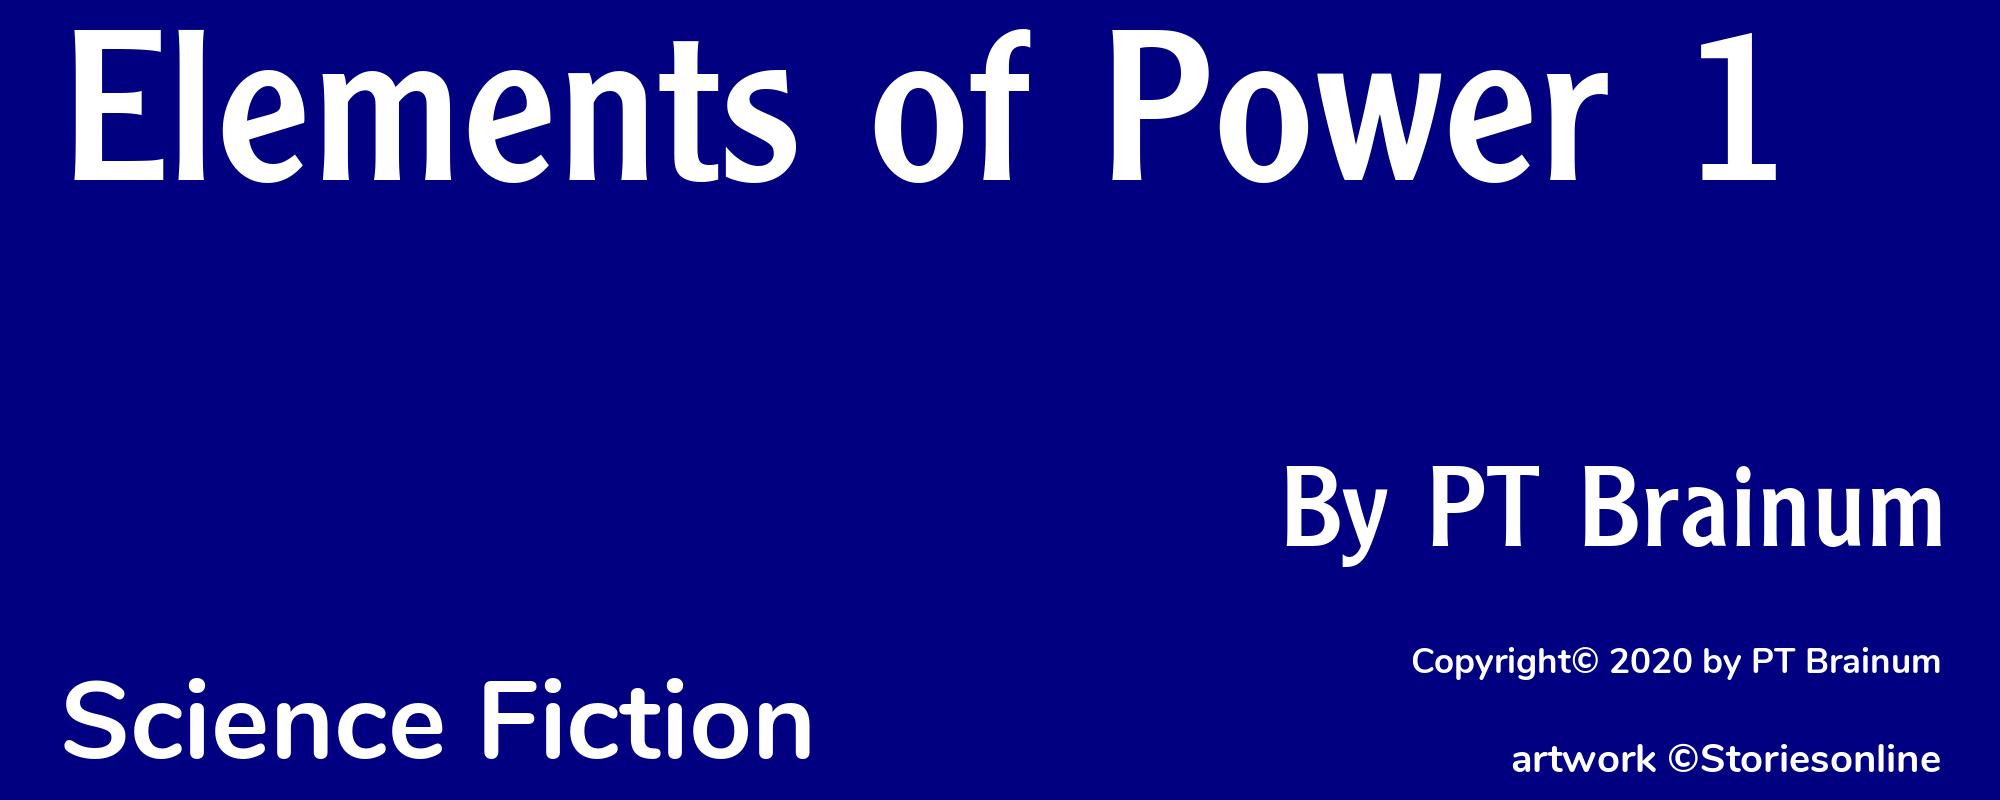 Elements of Power 1 - Cover